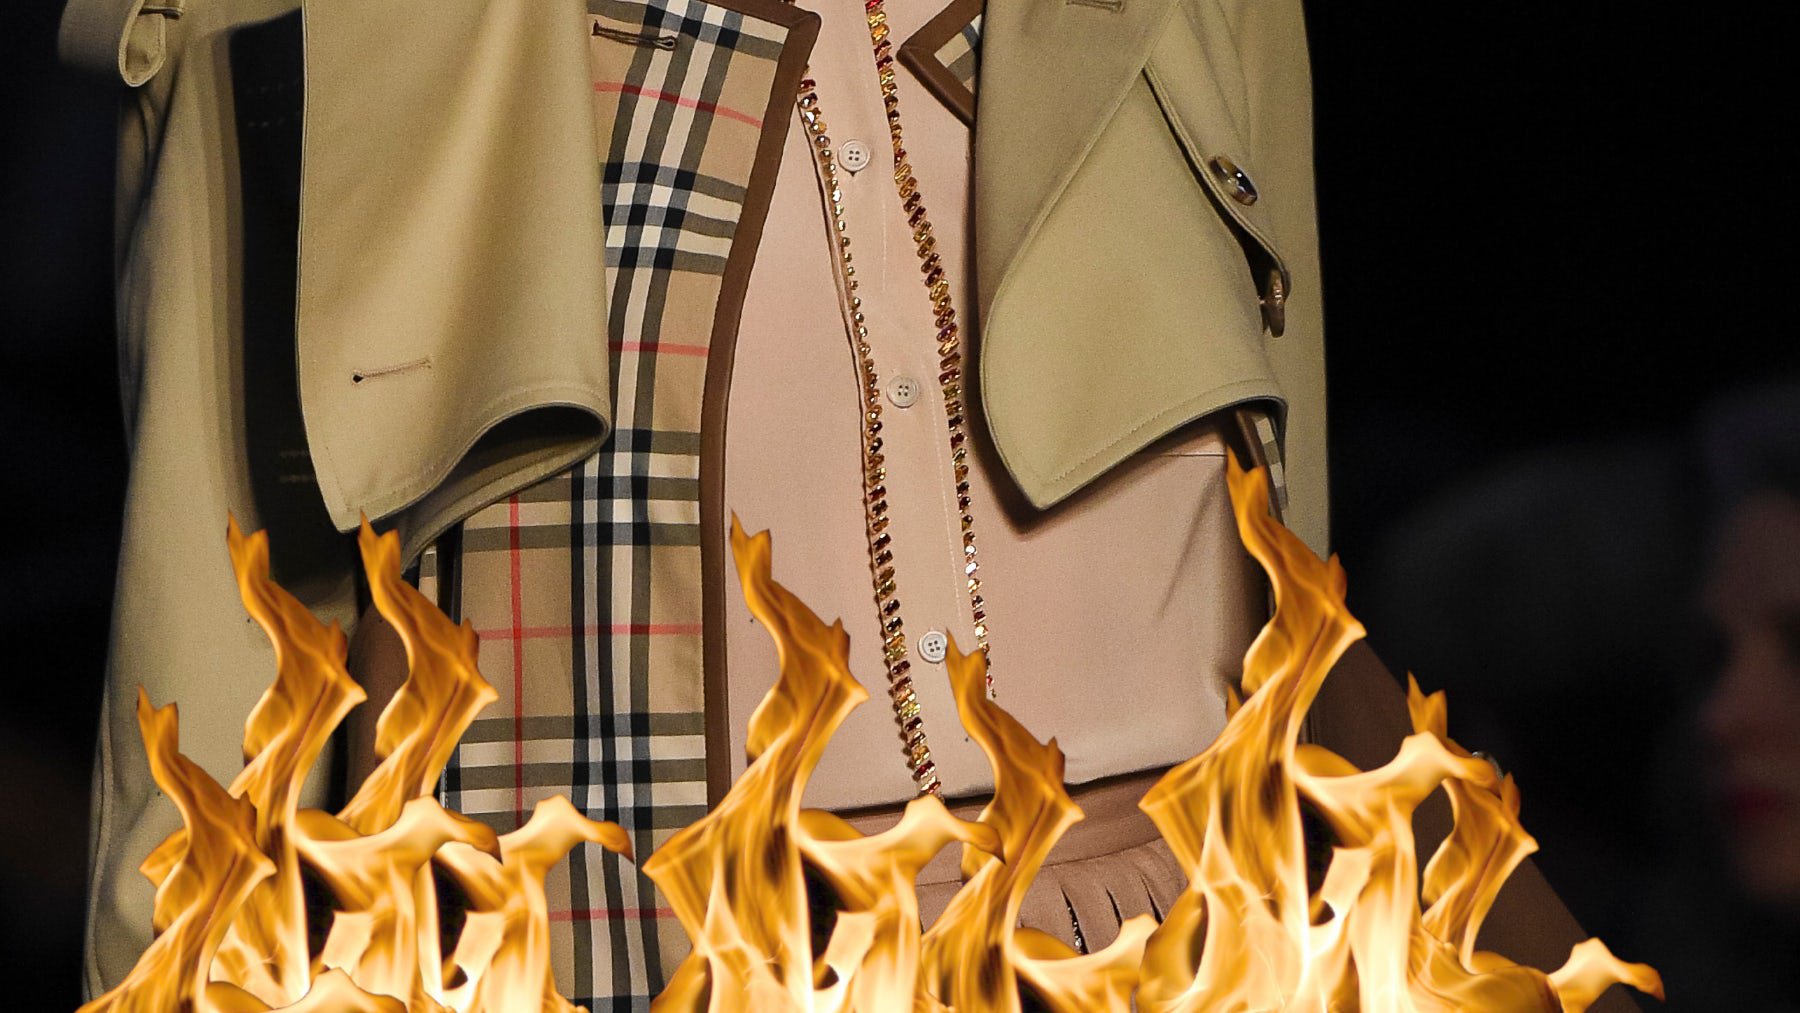 Burberry won't burn unsold goods anymore, but what about everyone